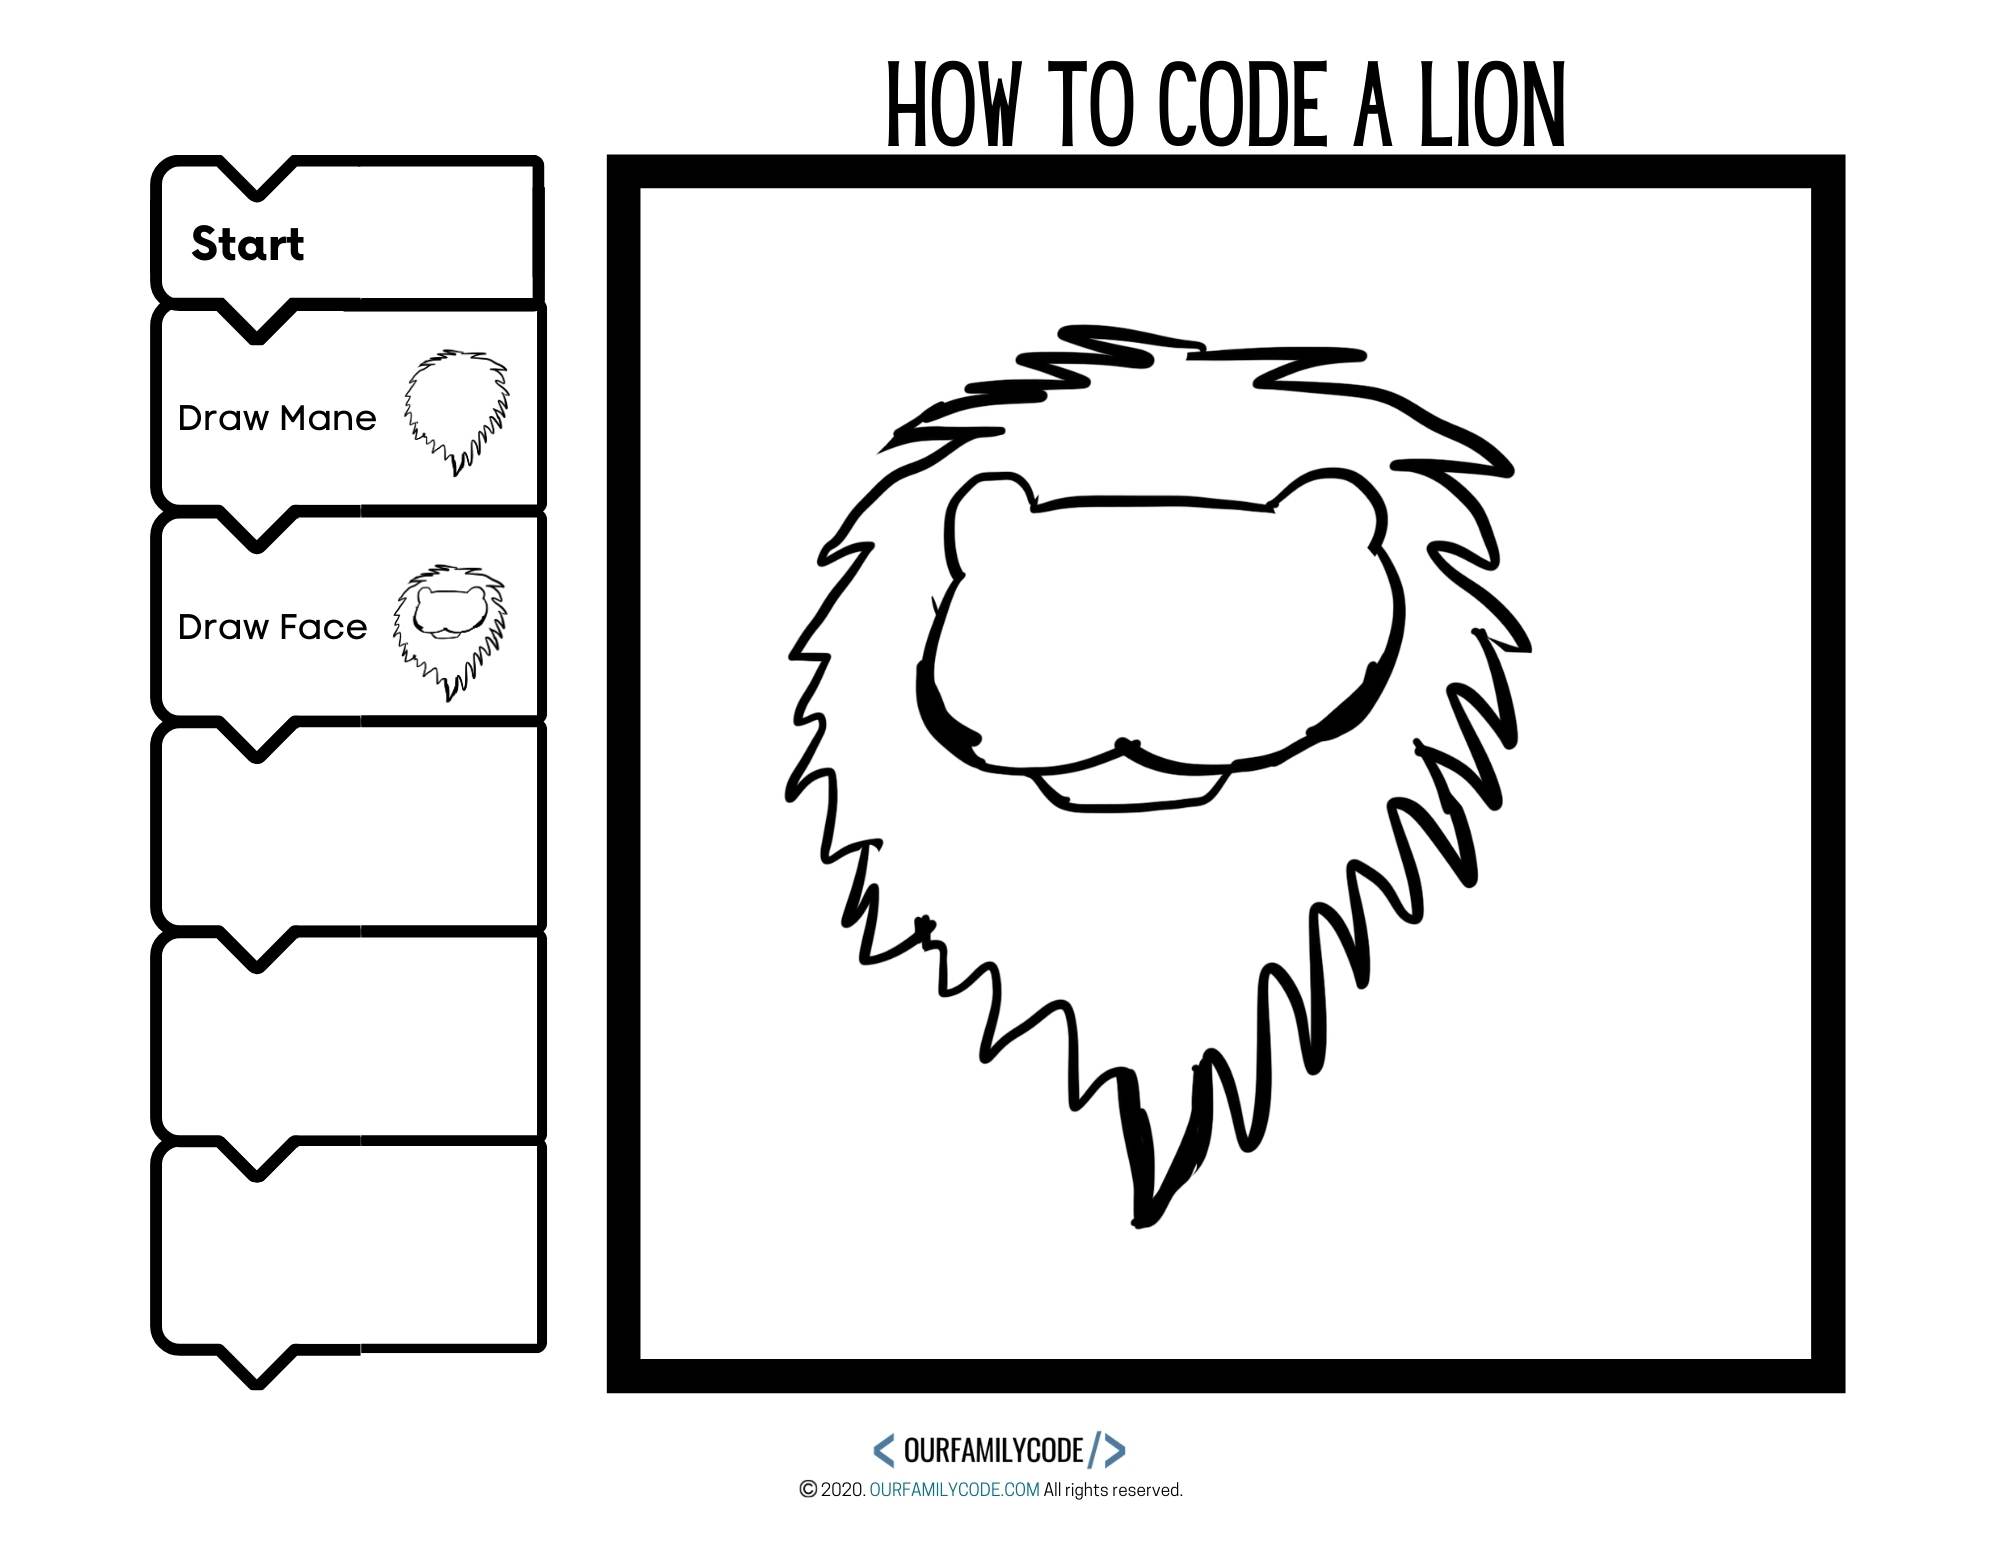 2 draw face directed drawing algorithm art lion coding activity